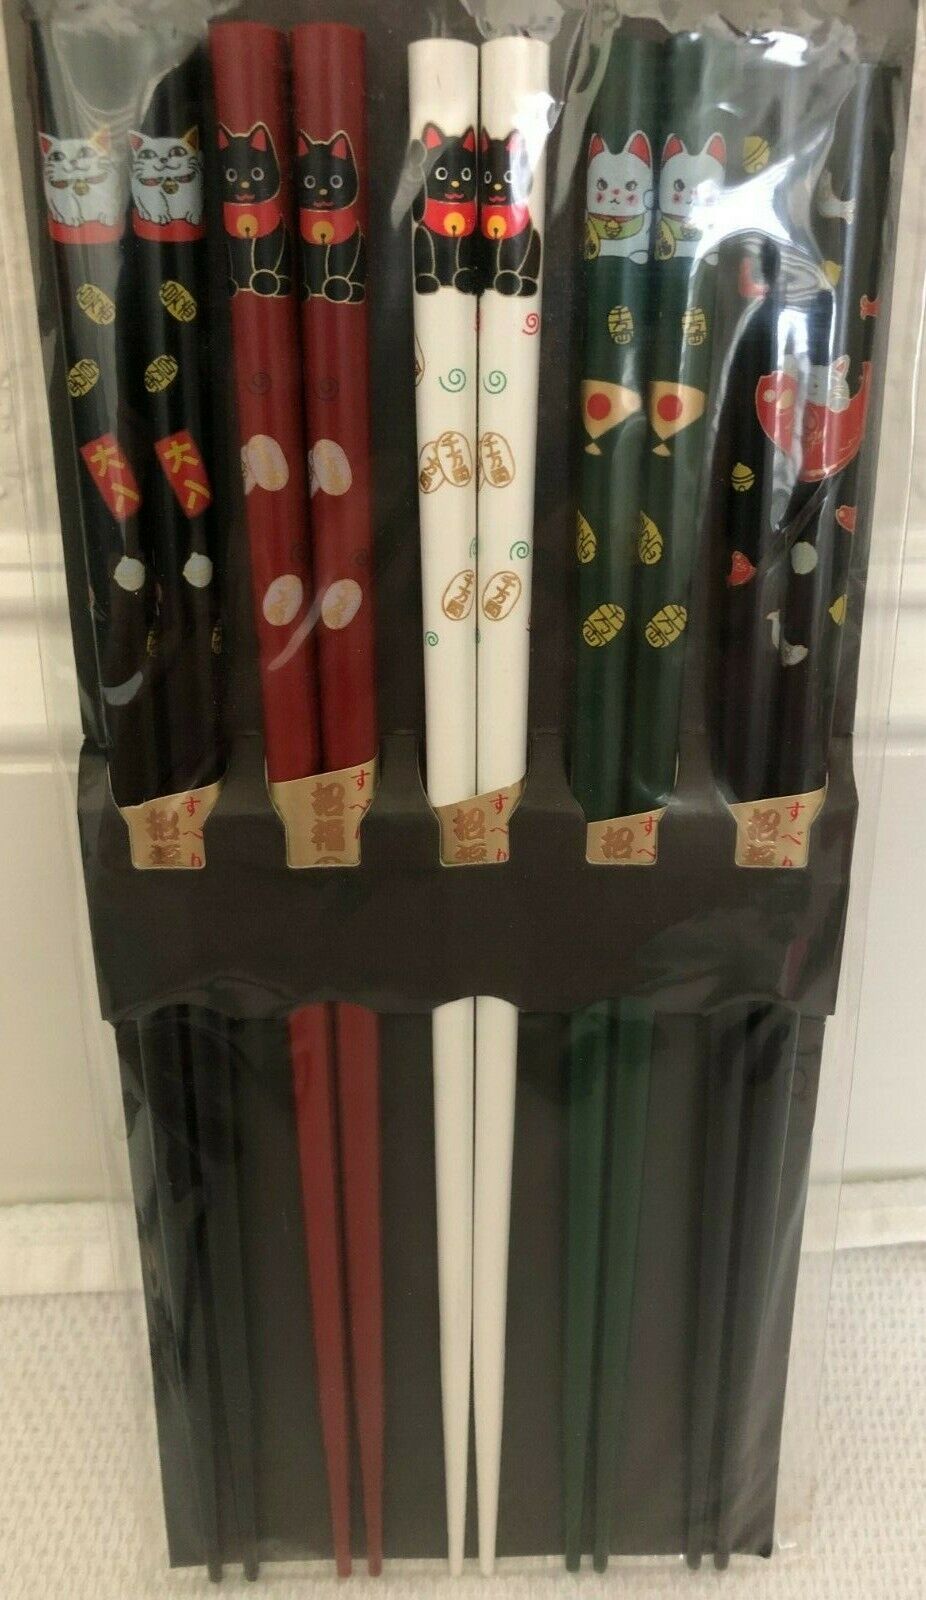 New Japanese Chopsticks W/lucky Cat Design - Set Of 5 (reusable) In Orig Package